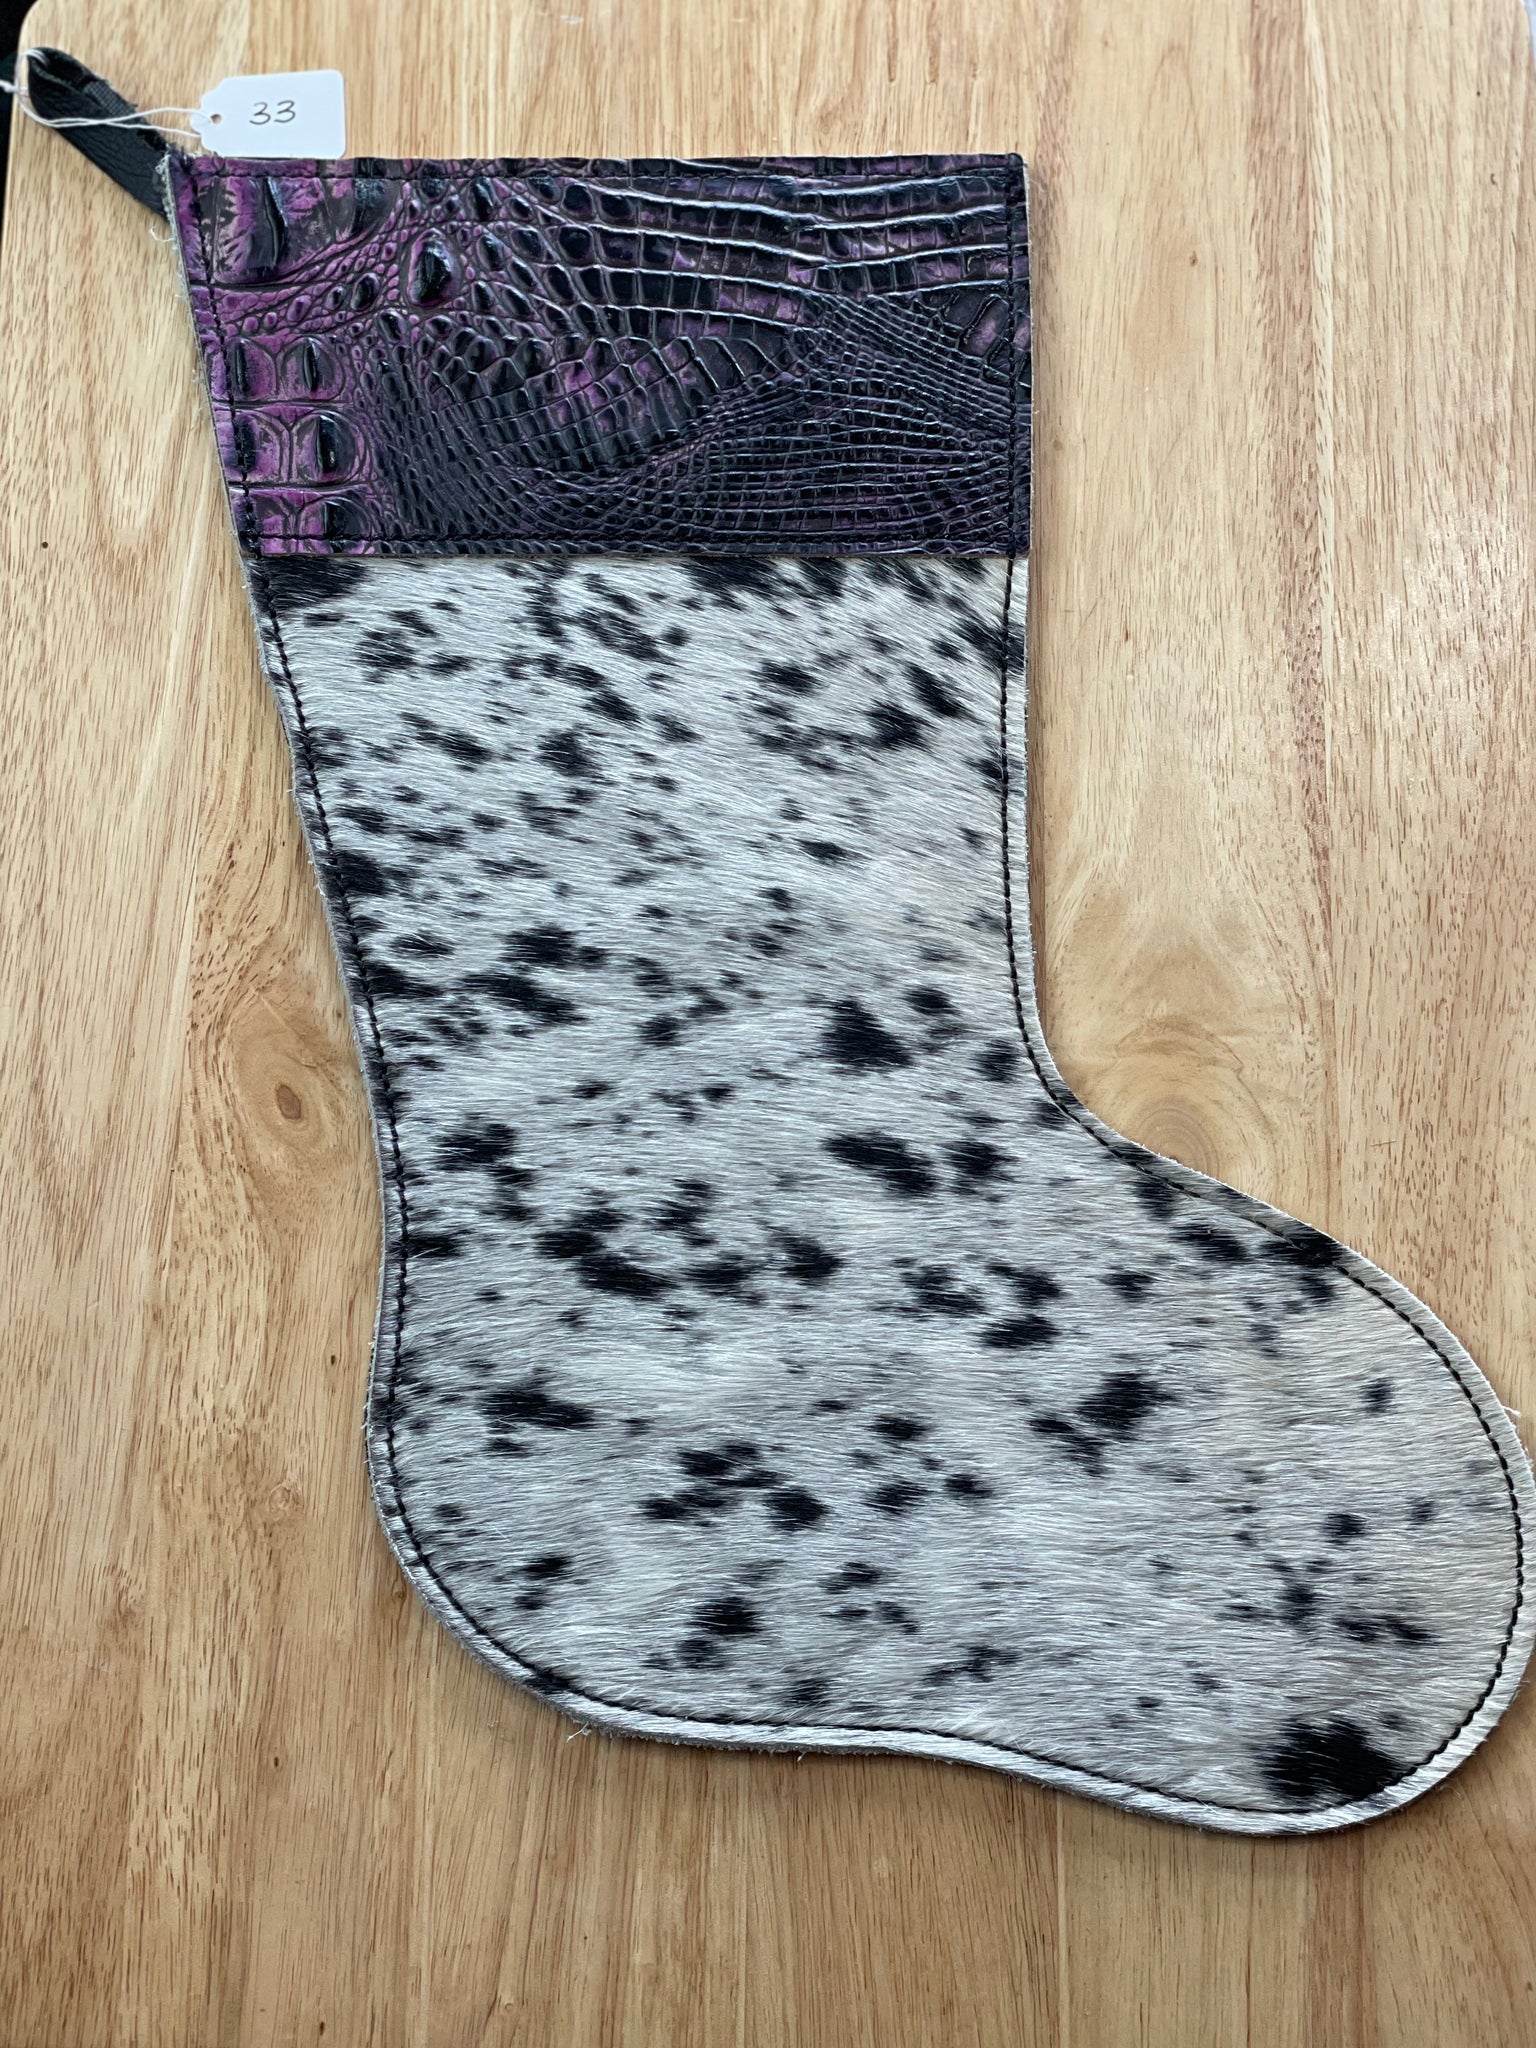 Cowhide and Leather Christmas Stocking #33